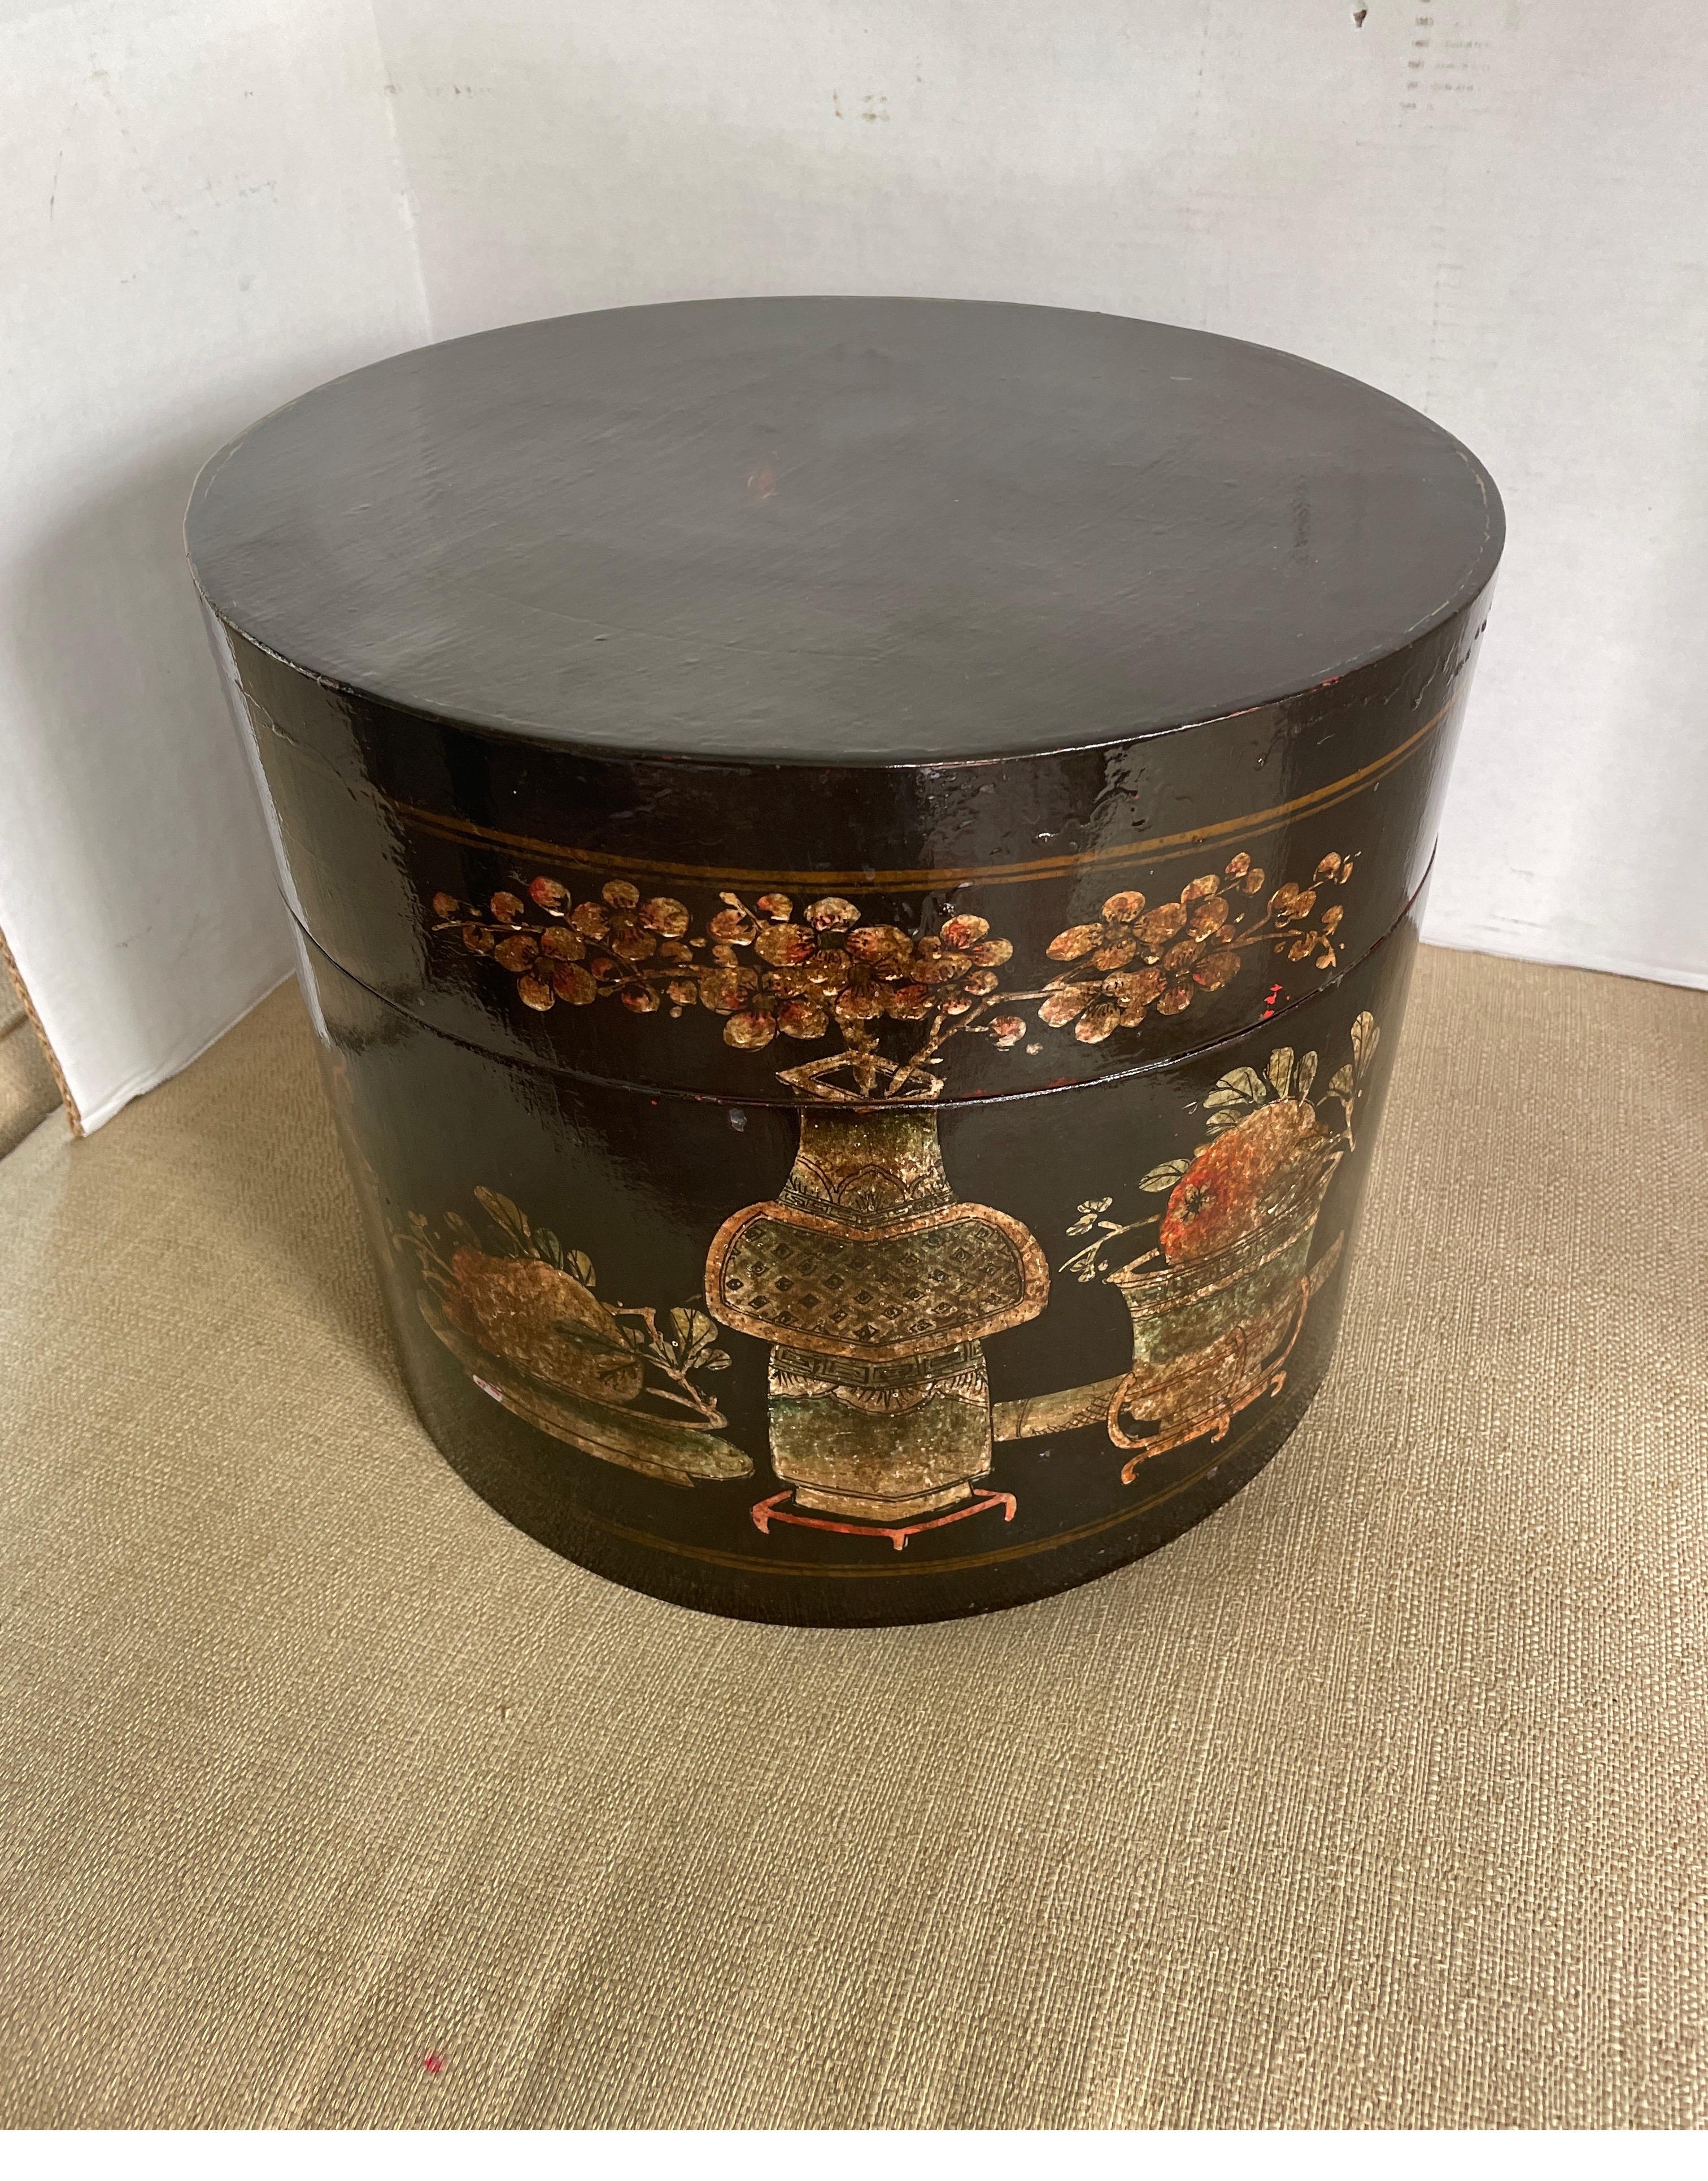 Antique black lacquer container with painted floral motifs used to store hats and personal belongings.